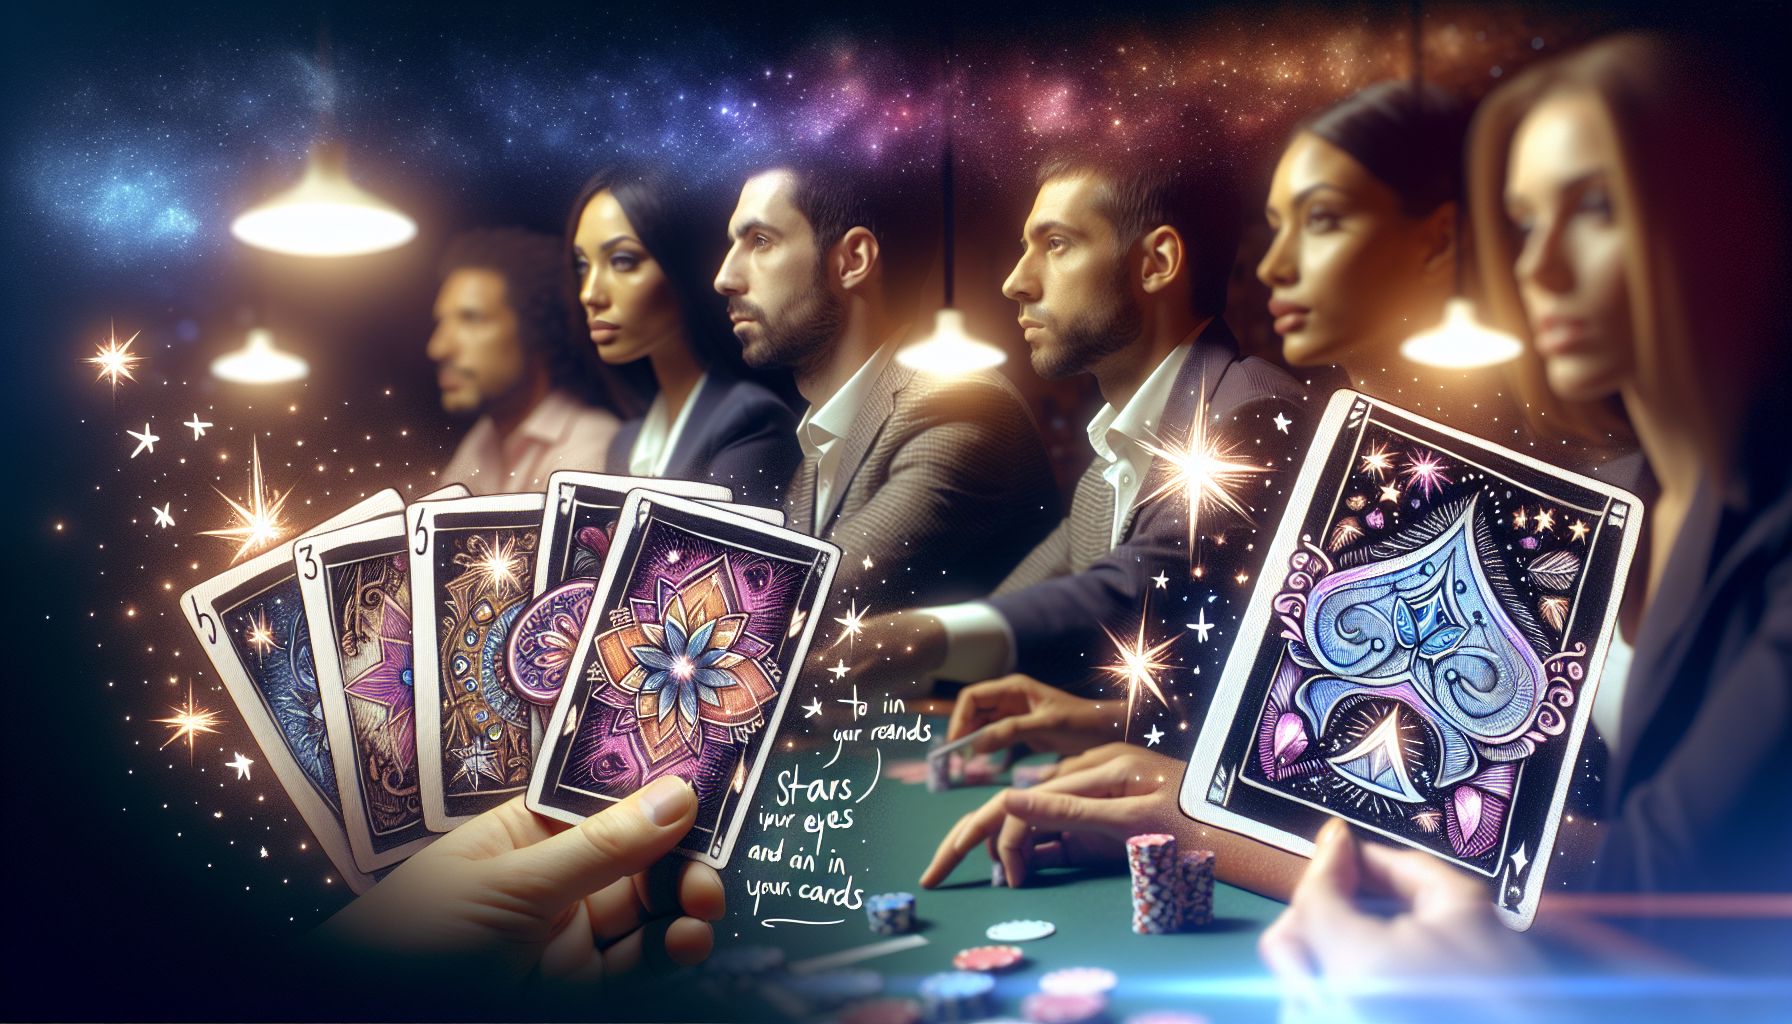 TCelebrity Poker Showdowns: Stars in Your Eyes and in Your Cards – Key Lessons Learned